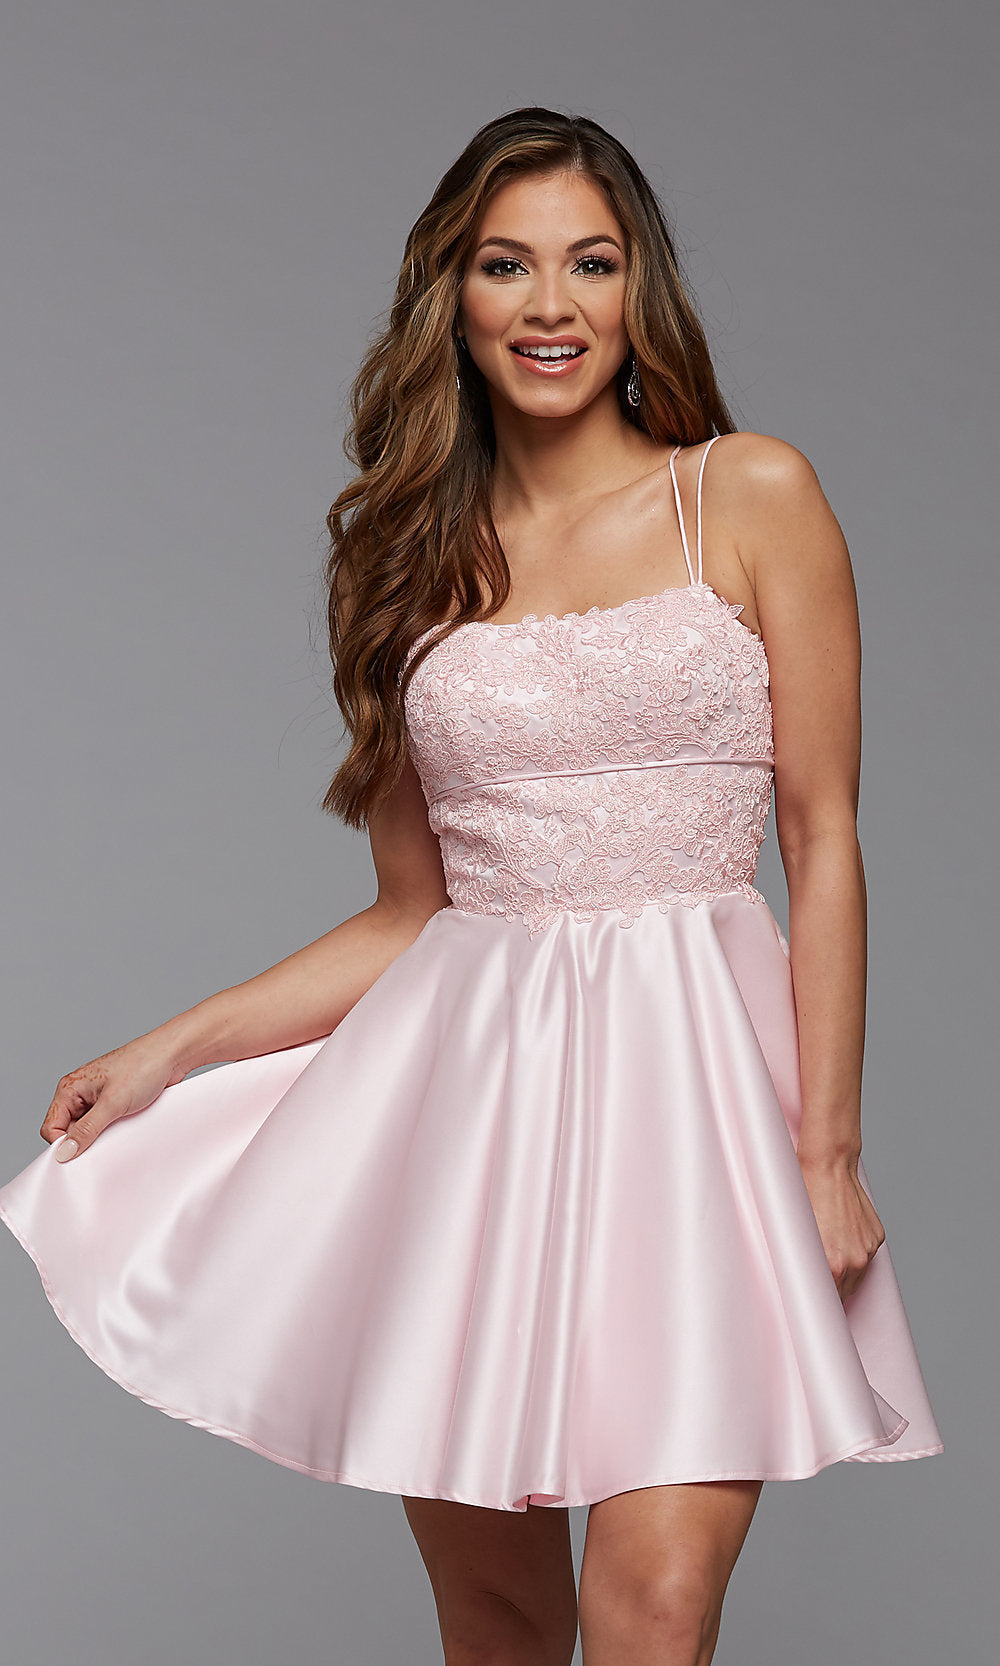 Short Formal Prom Dress with Lace Bodice